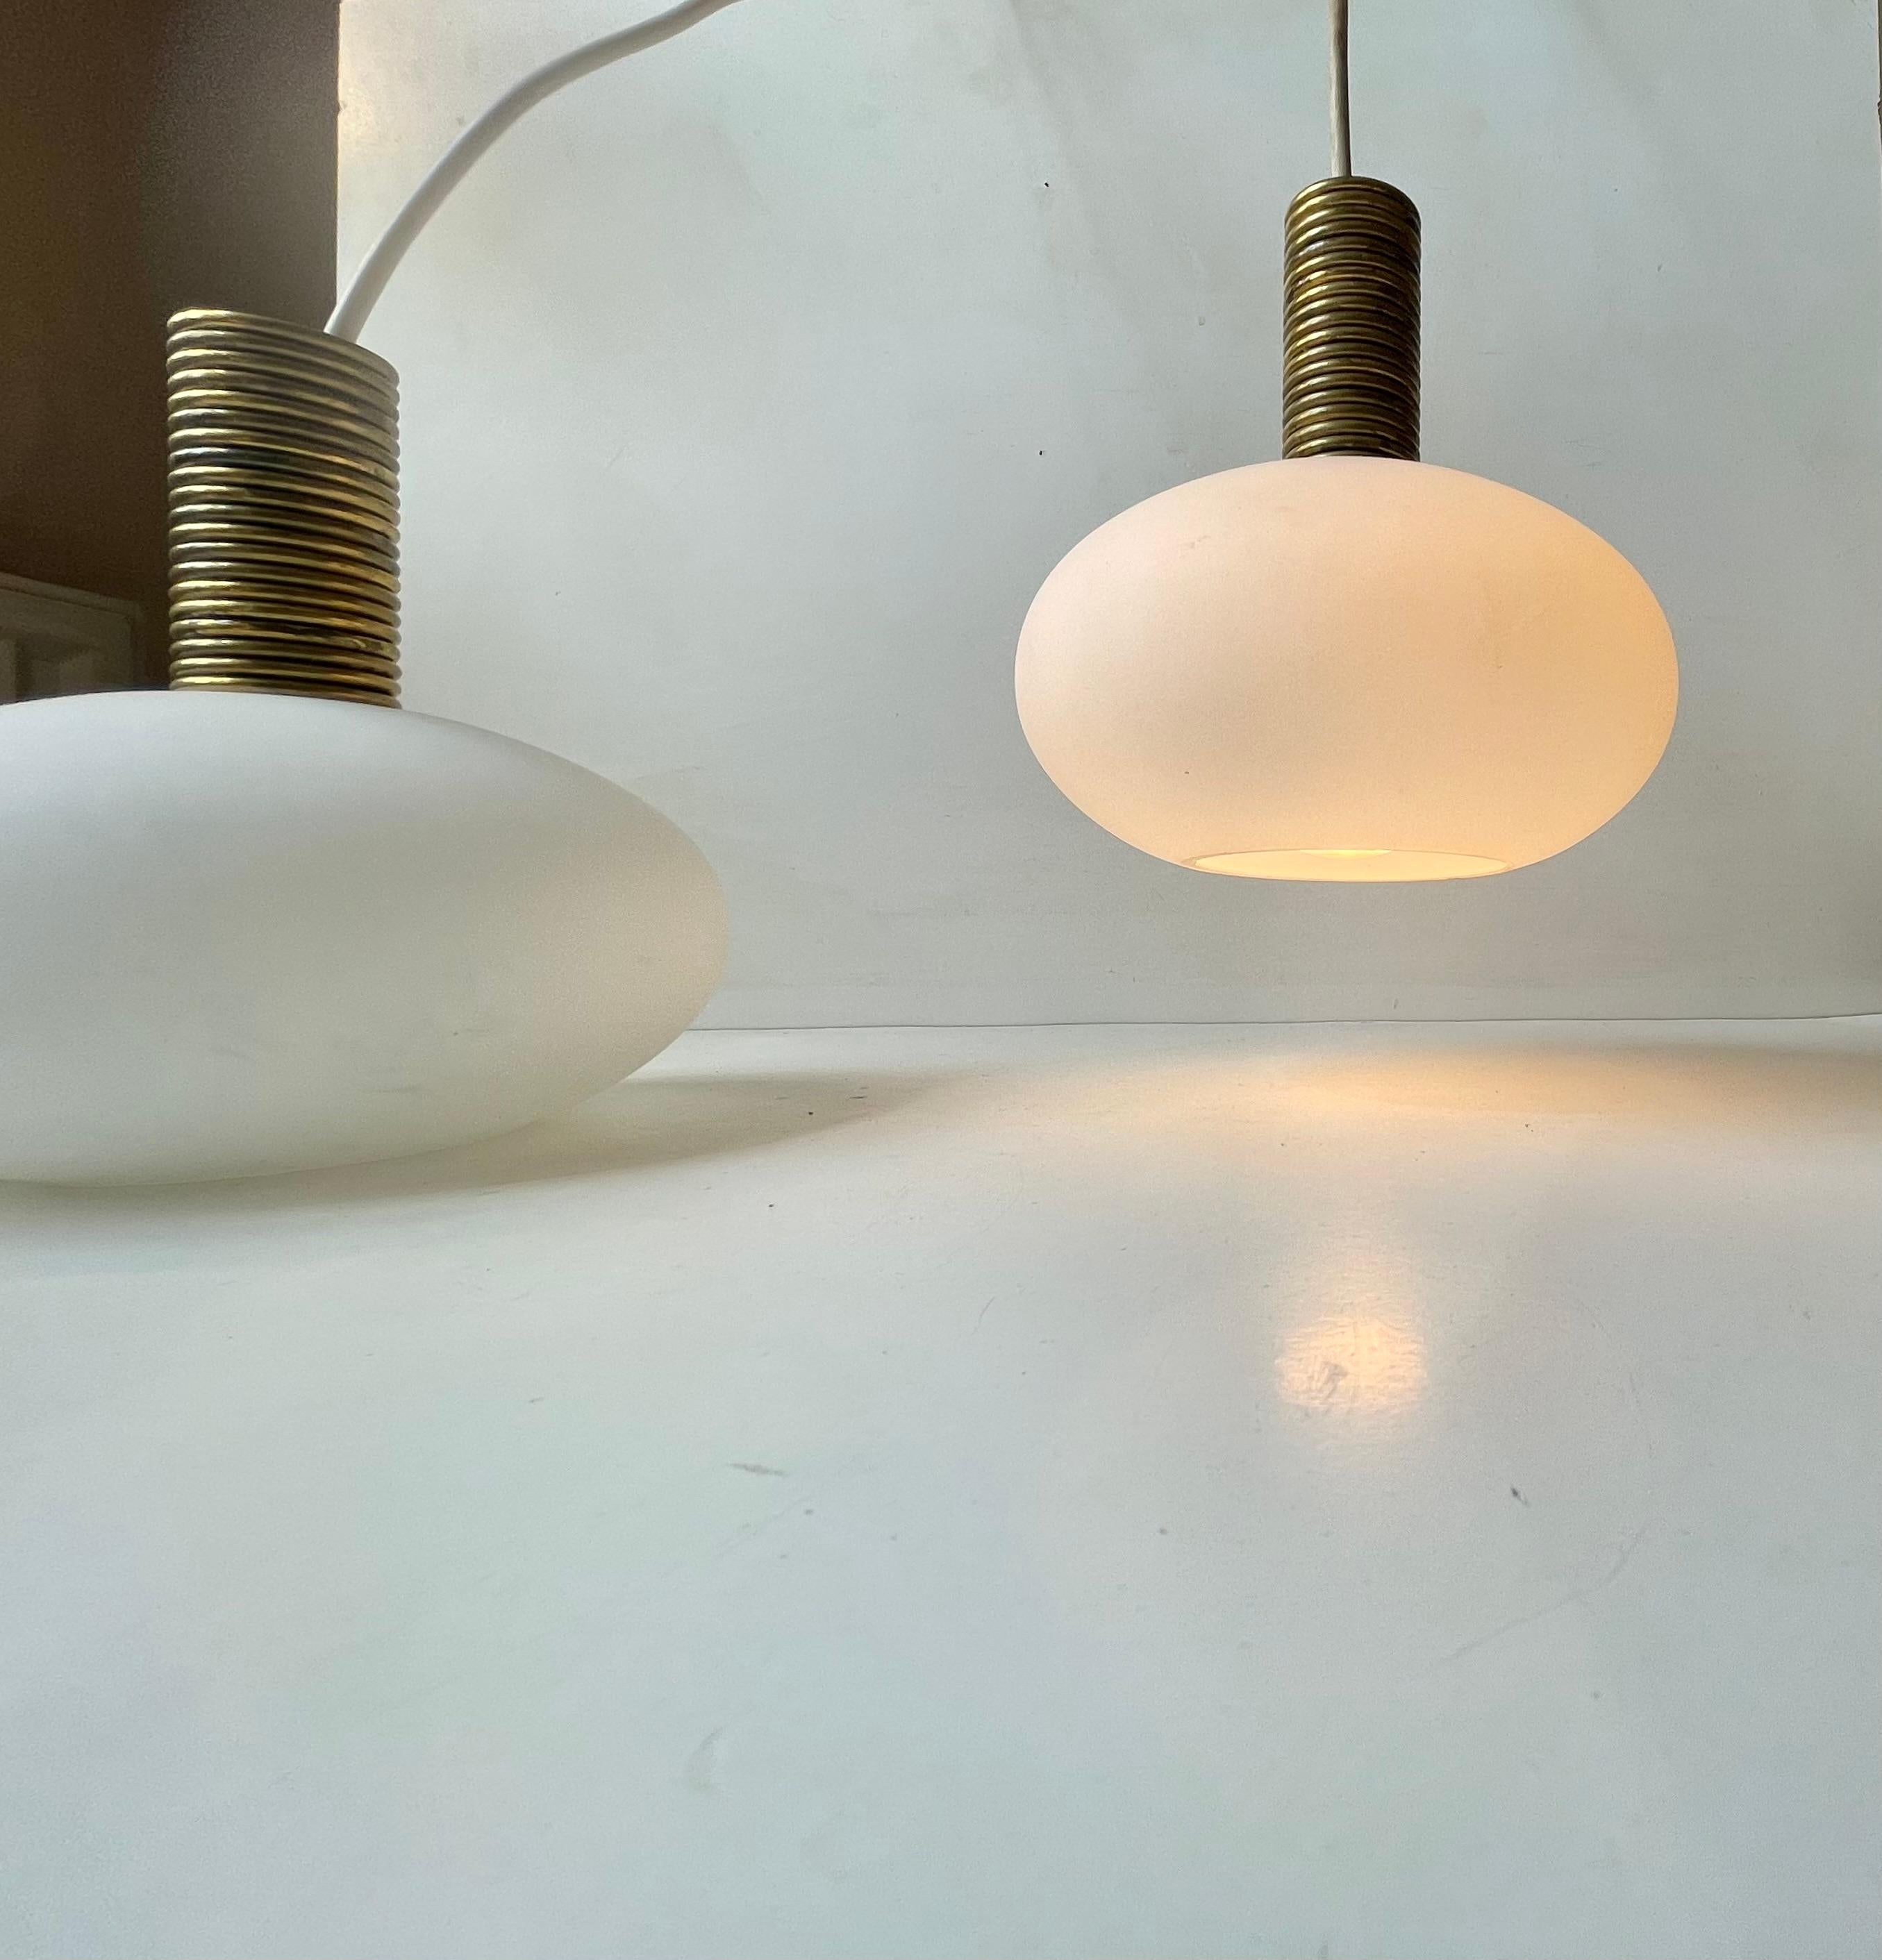 A stylish, unusual and bespoke pair of hanging lamps composed of frosted white glass and decorative tops made from brass rings. Unknown Italian maker/design, circa 1970-1980. Measurements: H: 20 cm, Diameter: 17 cm. The price is for the pair/set of